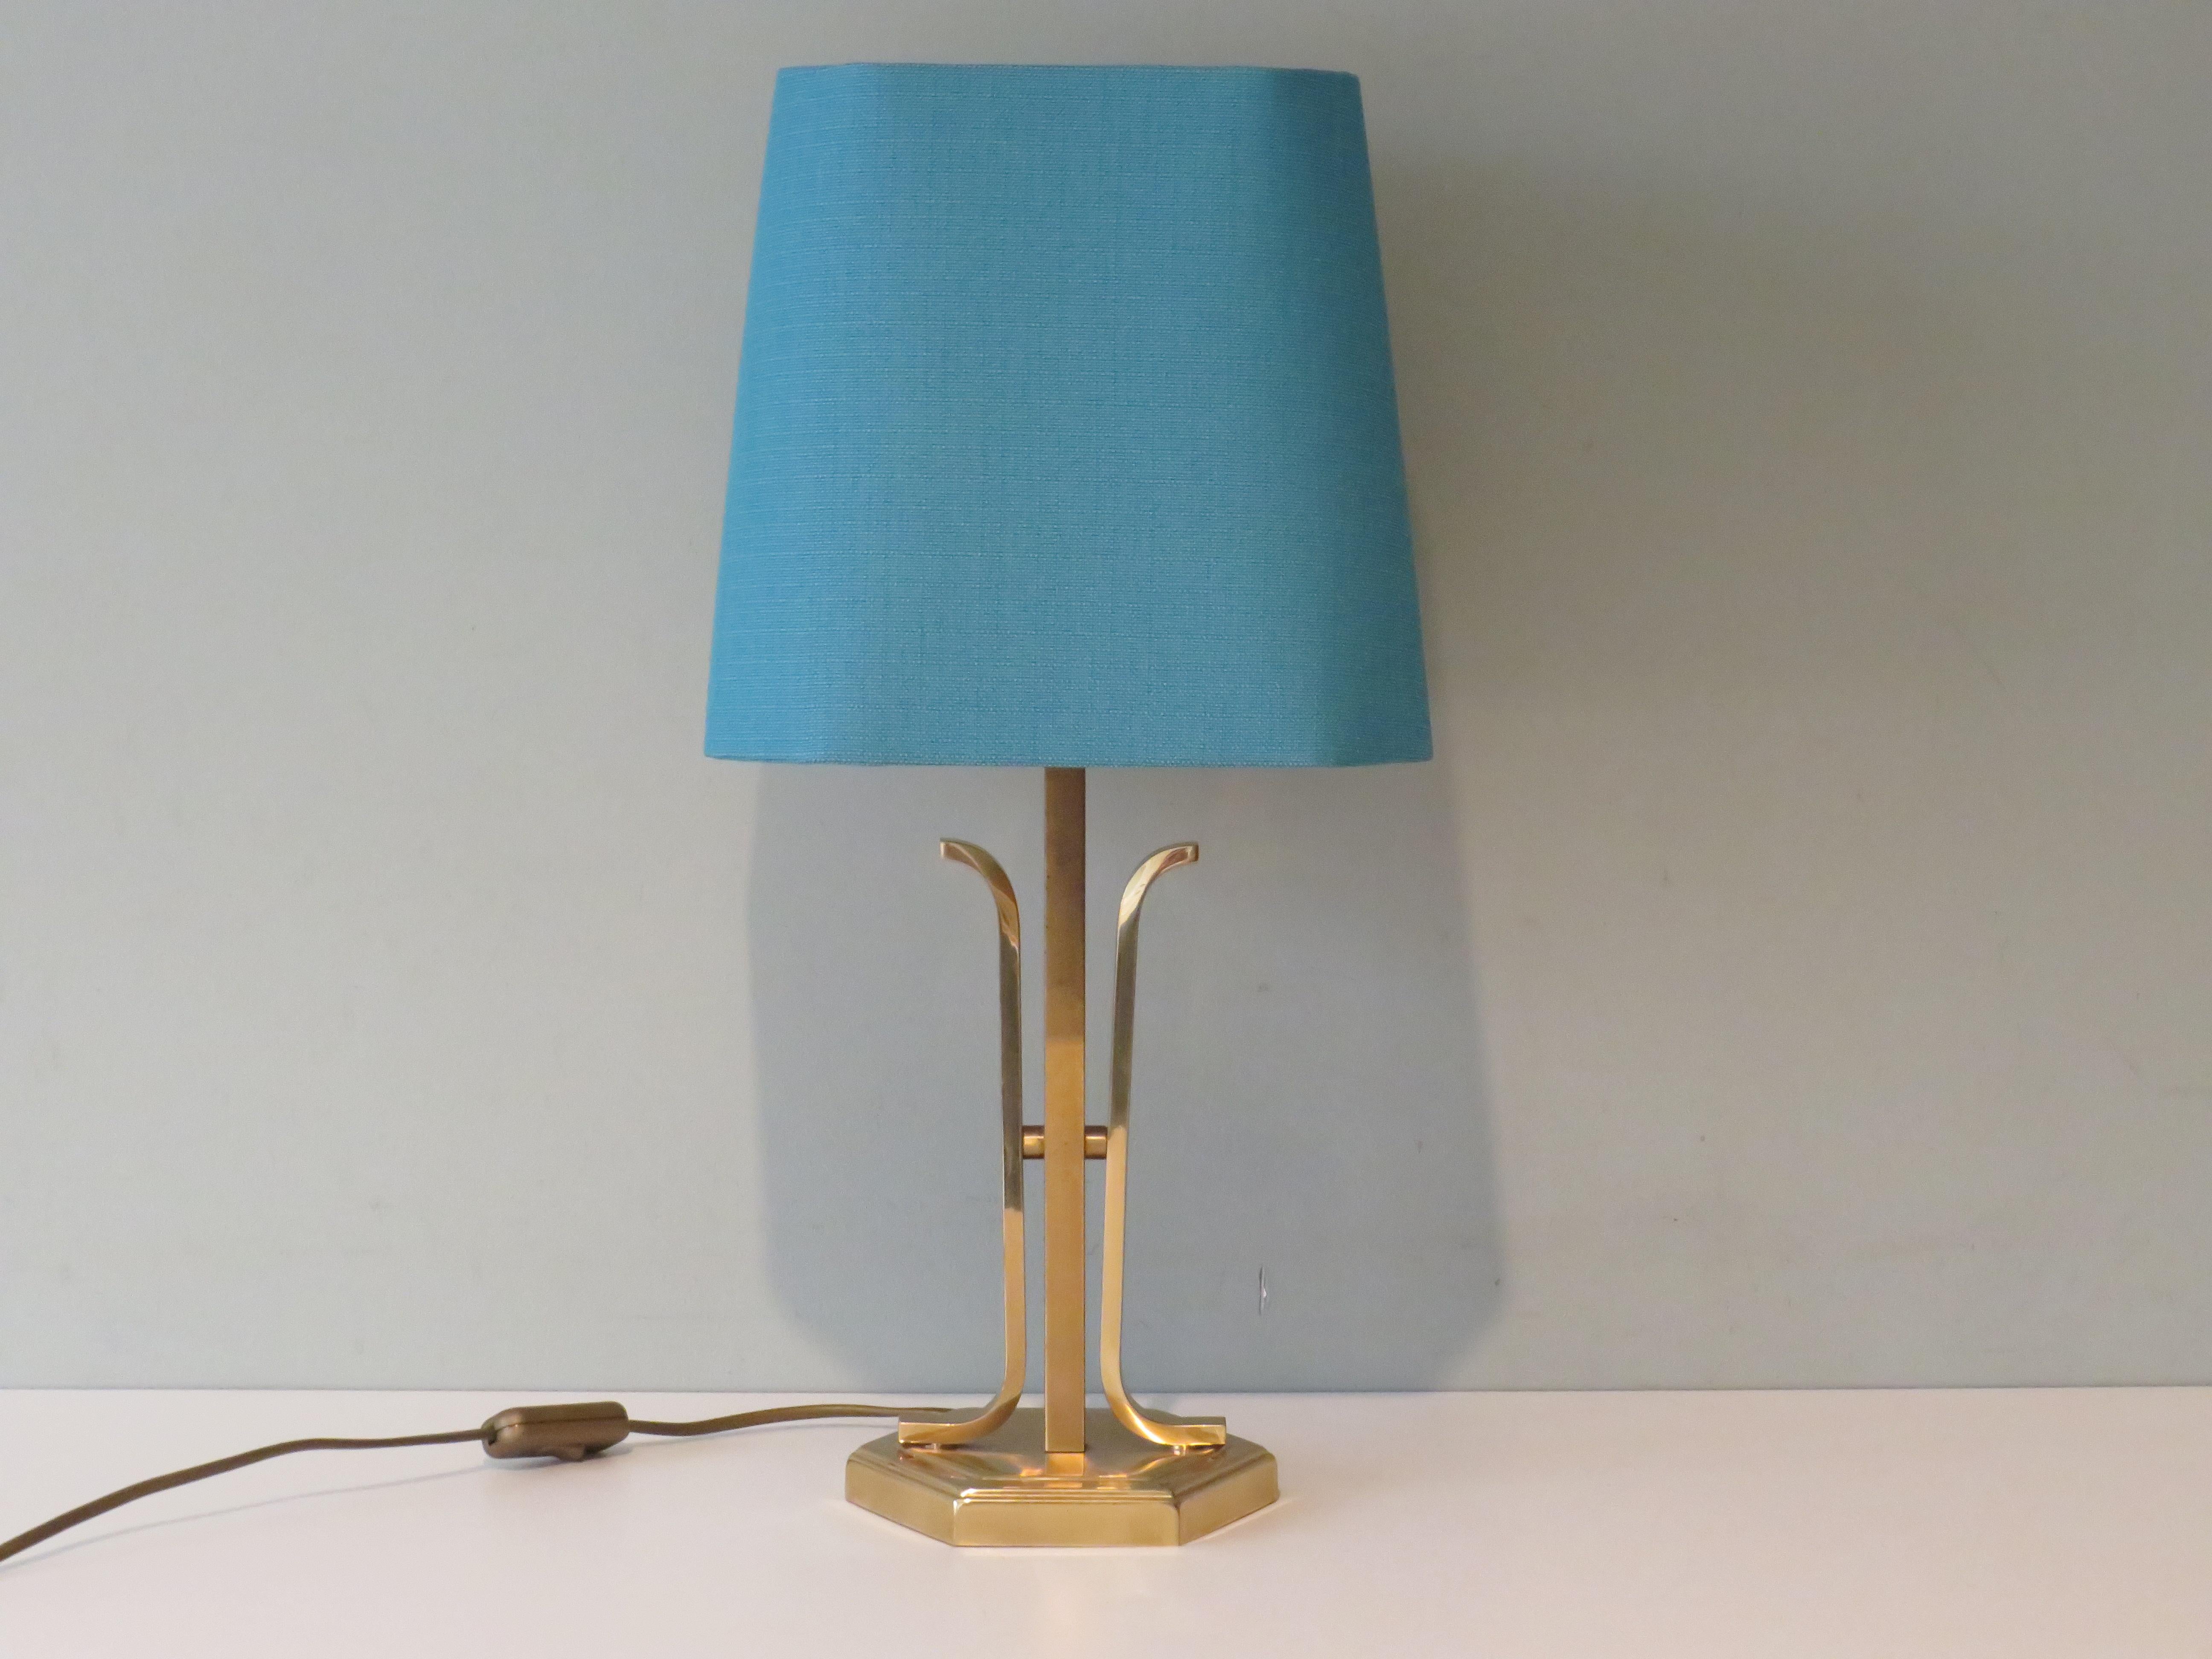 Stylish hexagonal brass lamp base with custom rounded octagonal lampshade in green-blue fabric. The lamp is equipped with 1 E 27 fitting and a gold-colored cord with gold-colored on and off button and plug.
Dimensions: total: Height 52.5 cm,